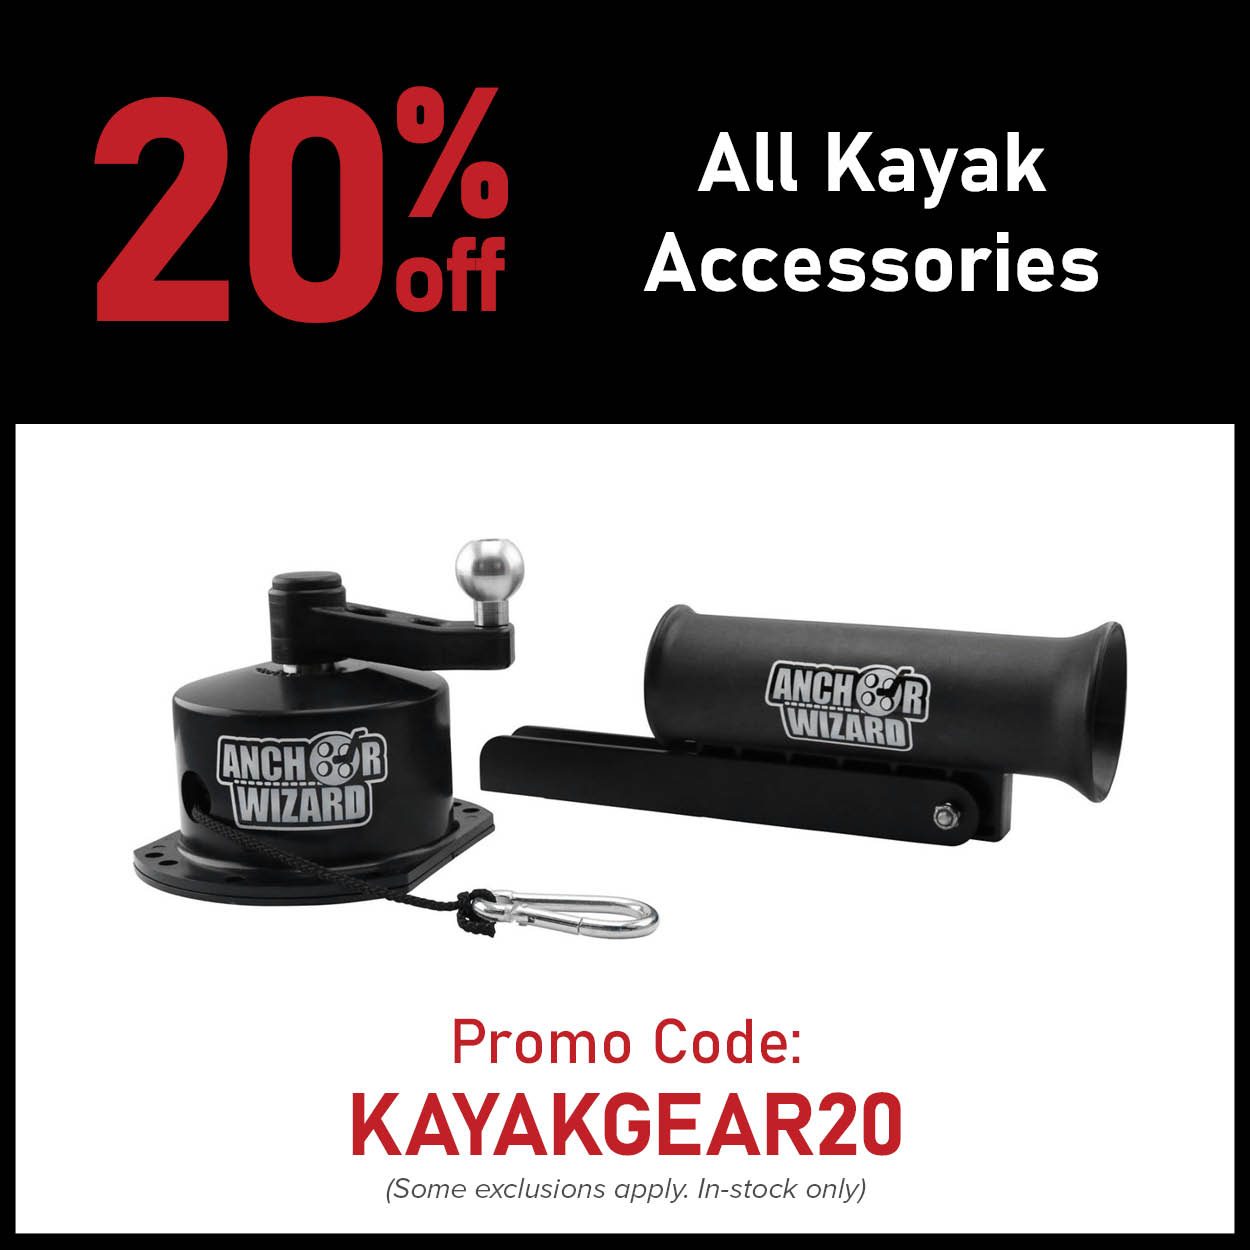 20% Off All Kayak Accessories (Some Exclusions Apply. In-stock only) Promo Code: KAYAKGEAR20